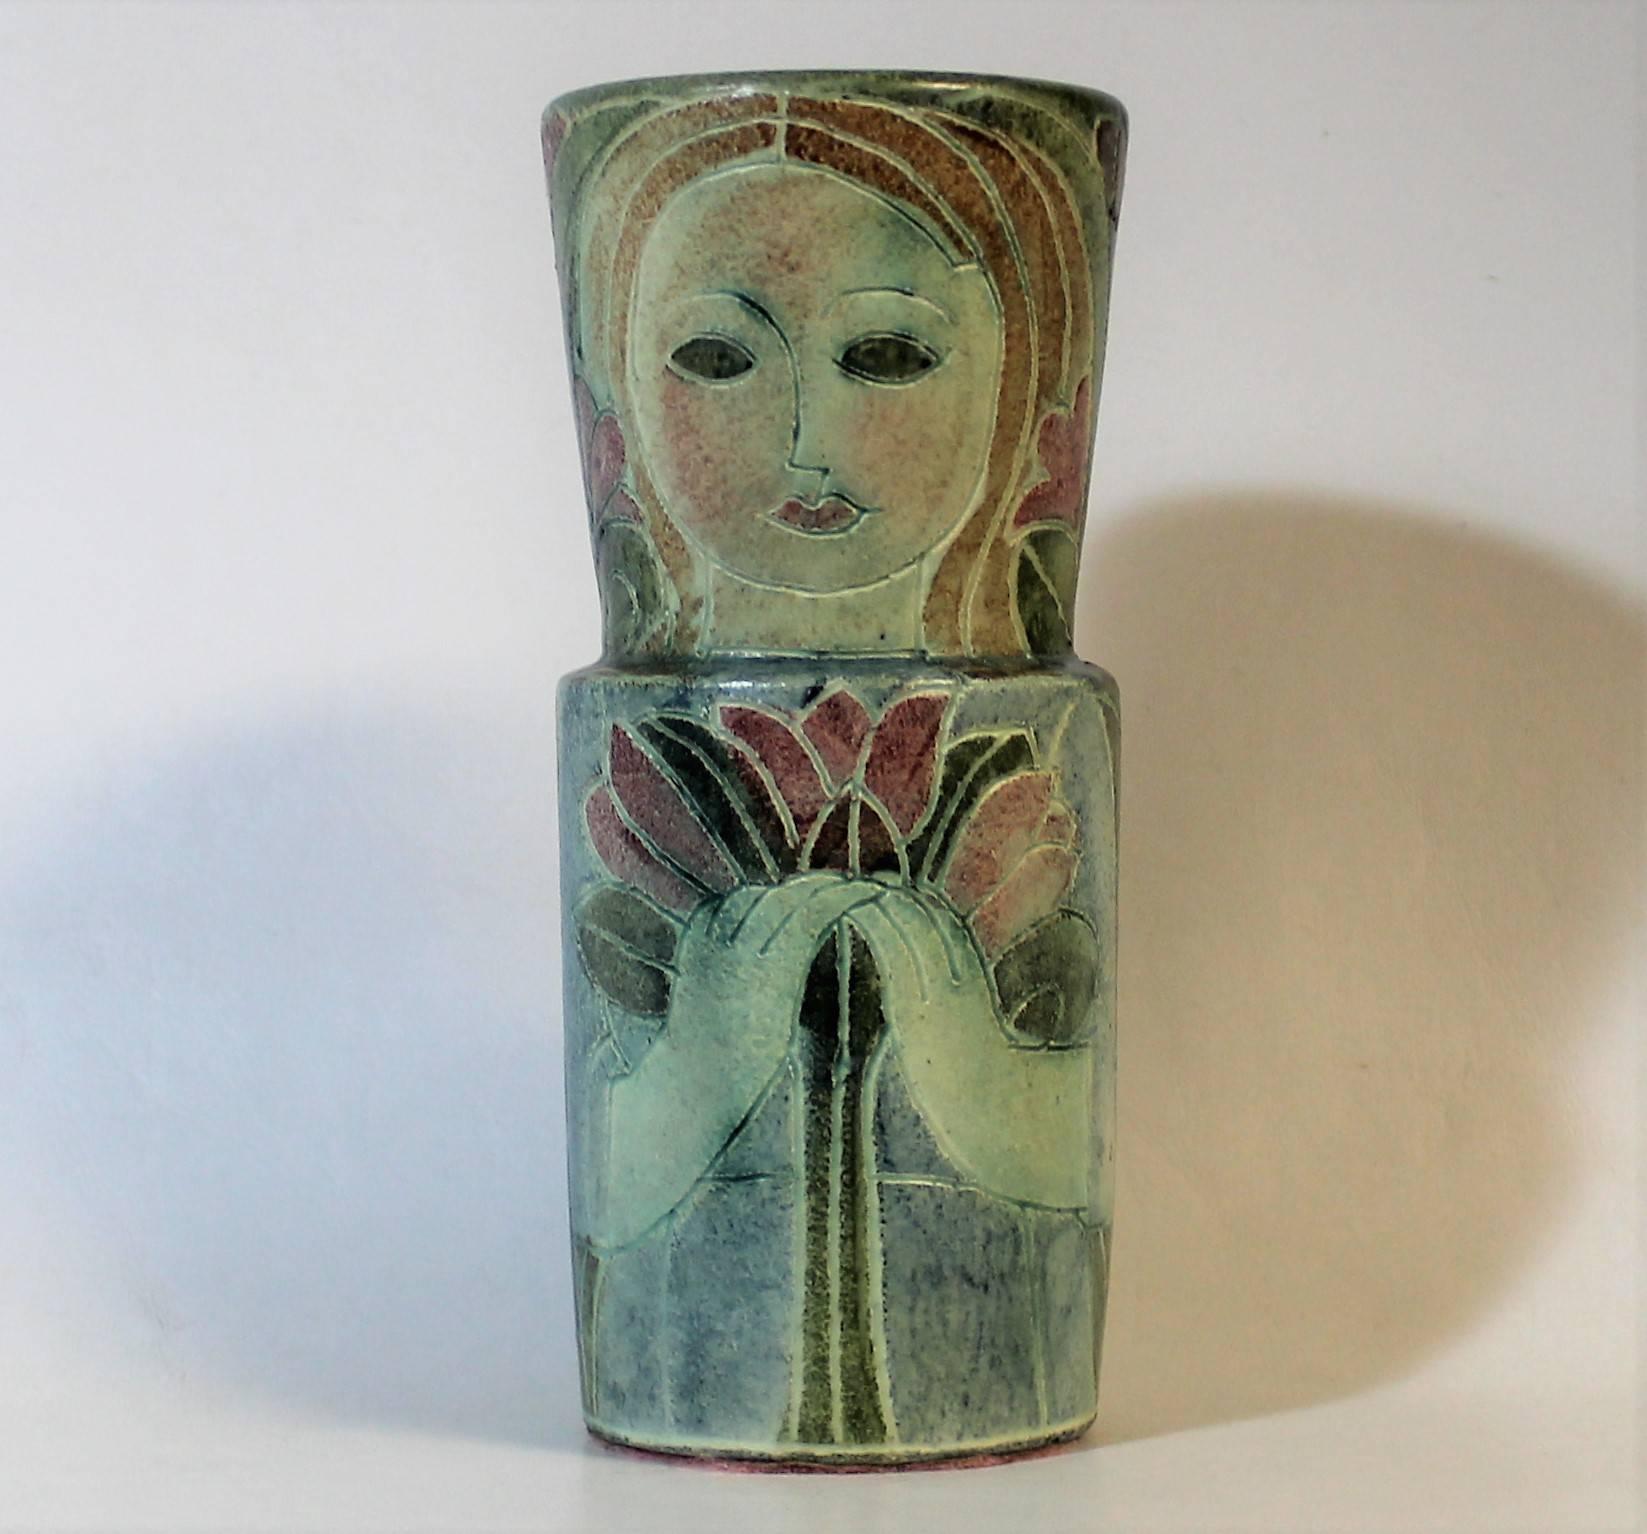 Studio pottery Mid-Century Modern vase by Theo and Susan Harlander of Brooklin Pottery, Brooklin, Ontario. This vase was designed with a whimsical cubist flare and done in rich colors with a matte glaze finish. It features two female sgraffito